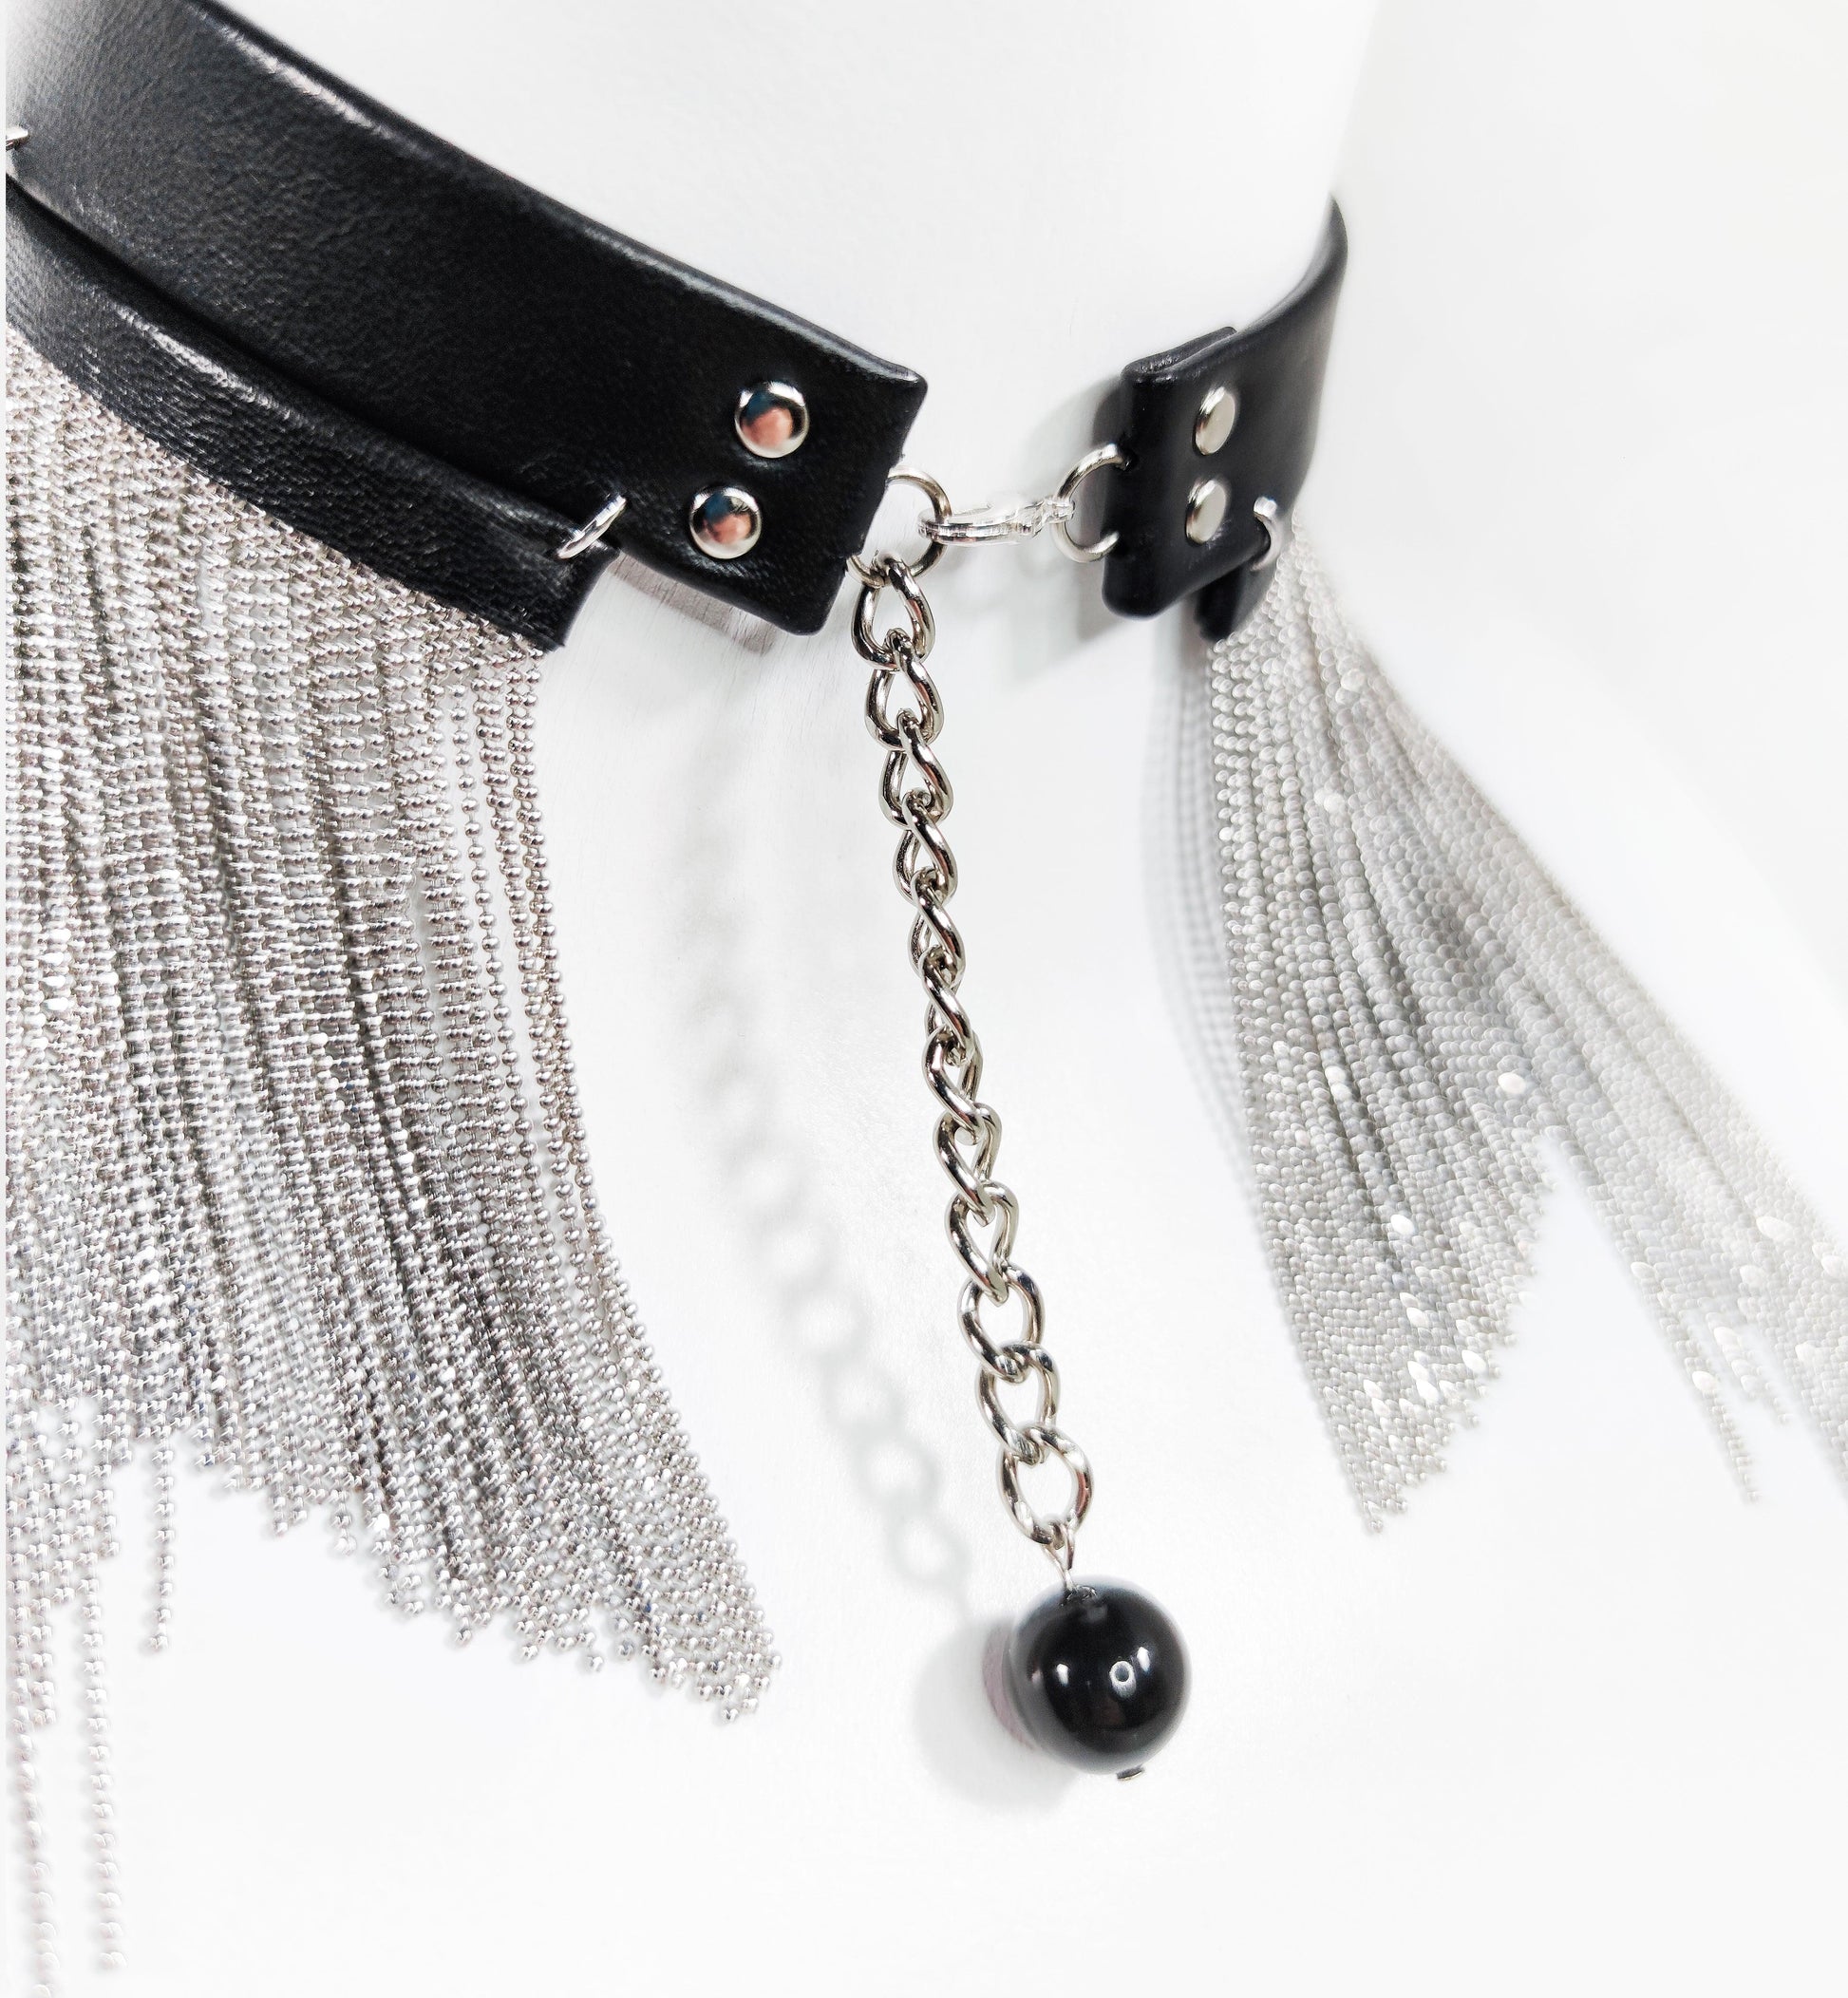 Exquisite detail of Long Leather Chocker with Chains showcasing the fine craftsmanship and elegant design characteristic of Axinia Collection 's luxury collection.